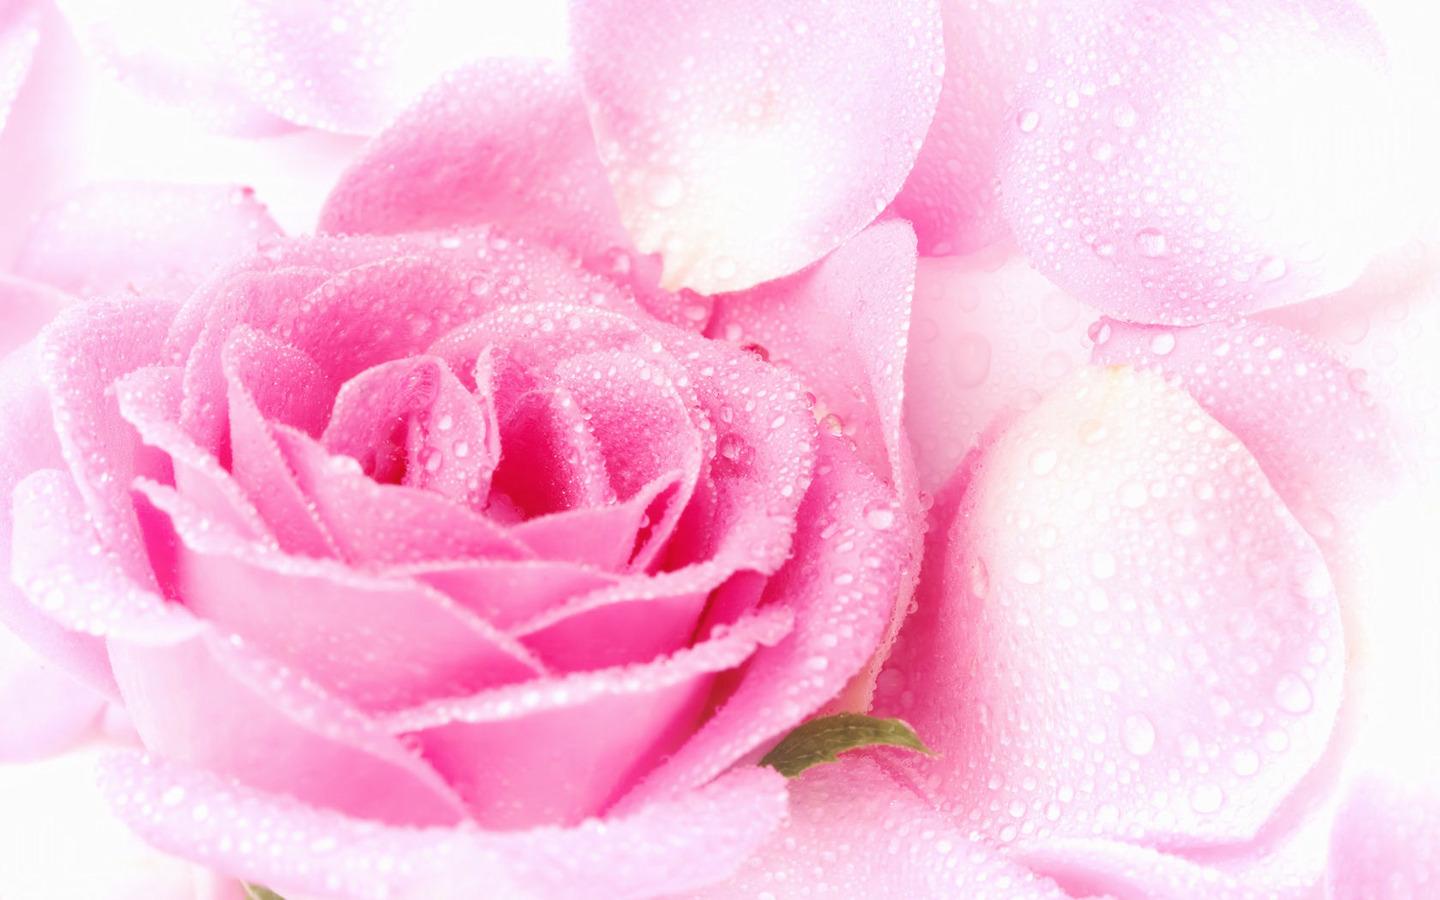 Awesome Pink Rose Macro Wallpaper Widescreen High